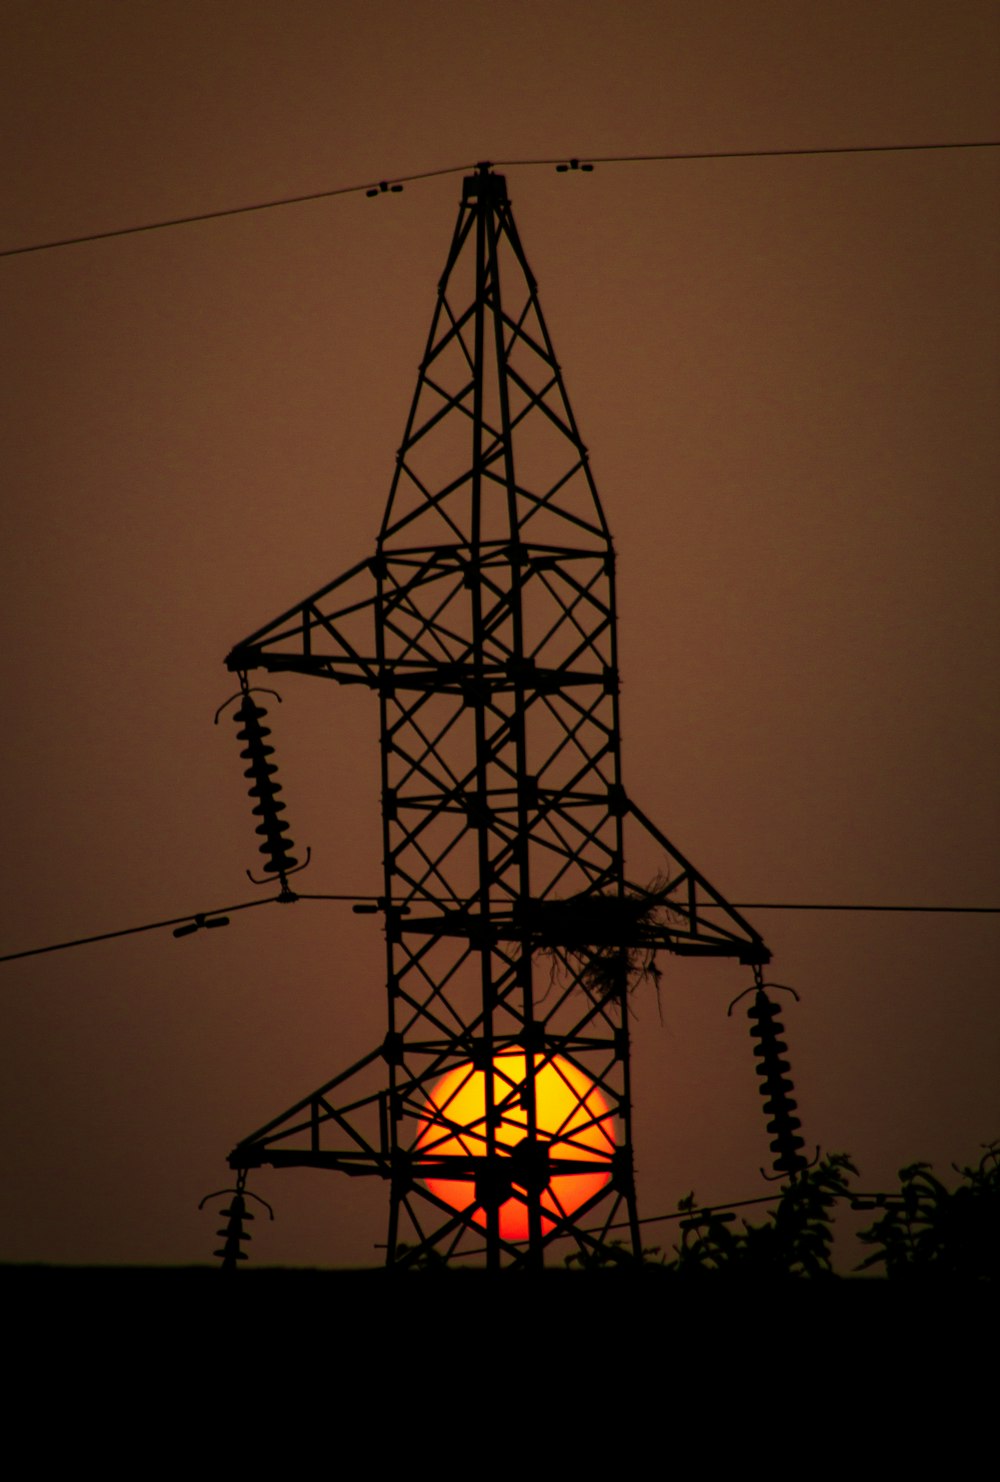 the sun is setting behind a power line tower